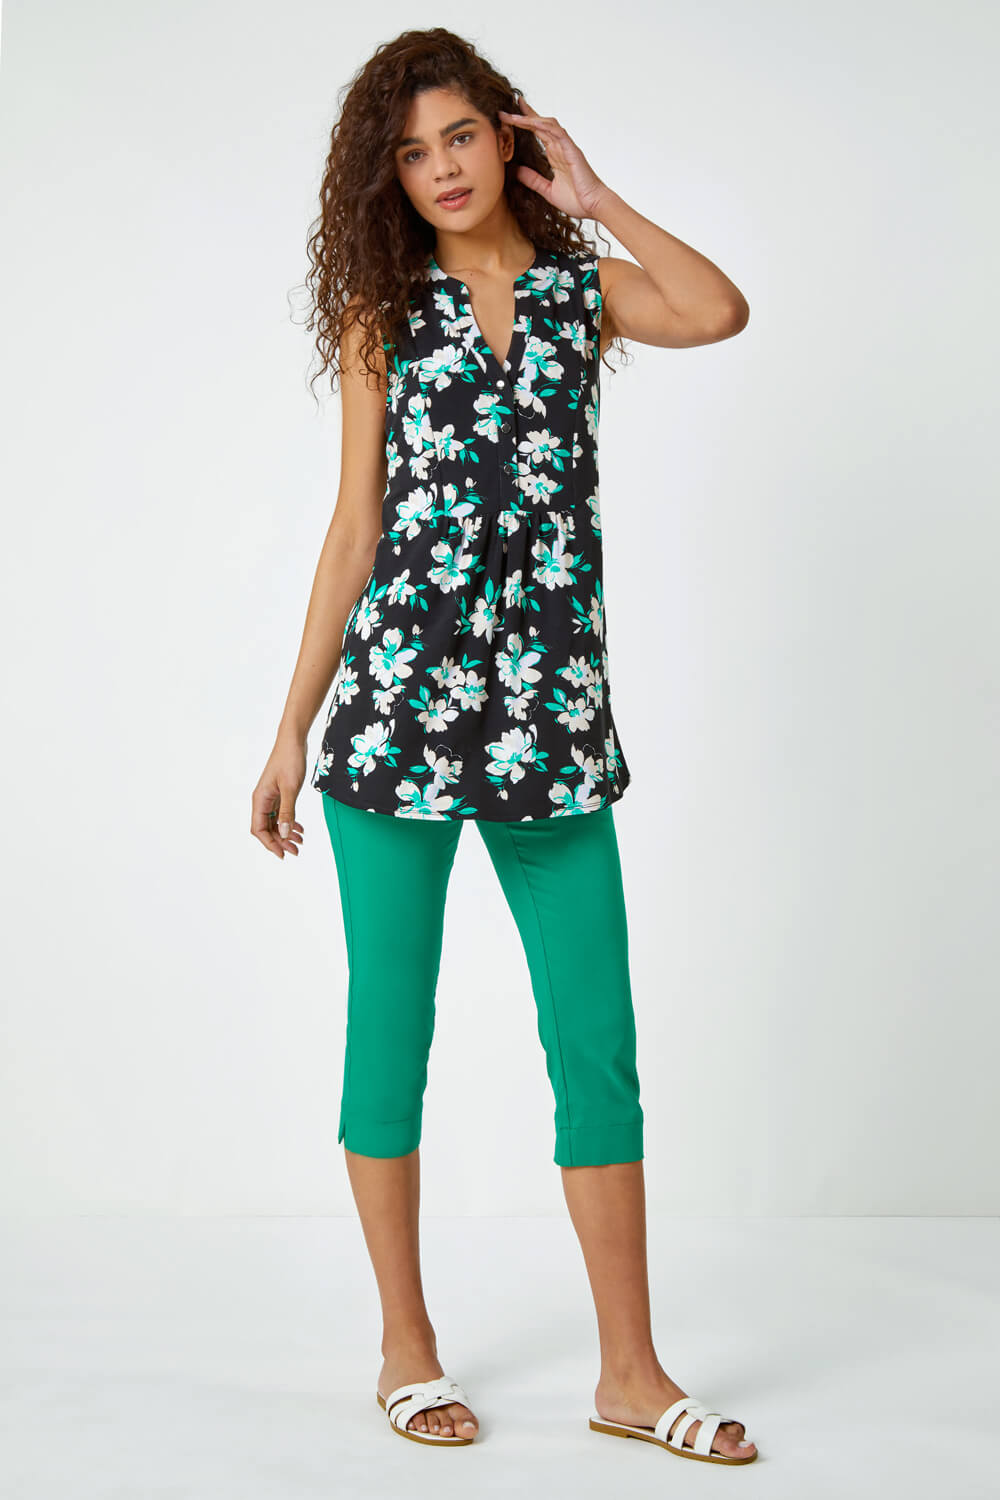 Green Sleeveless Floral Print Smock Top, Image 2 of 5